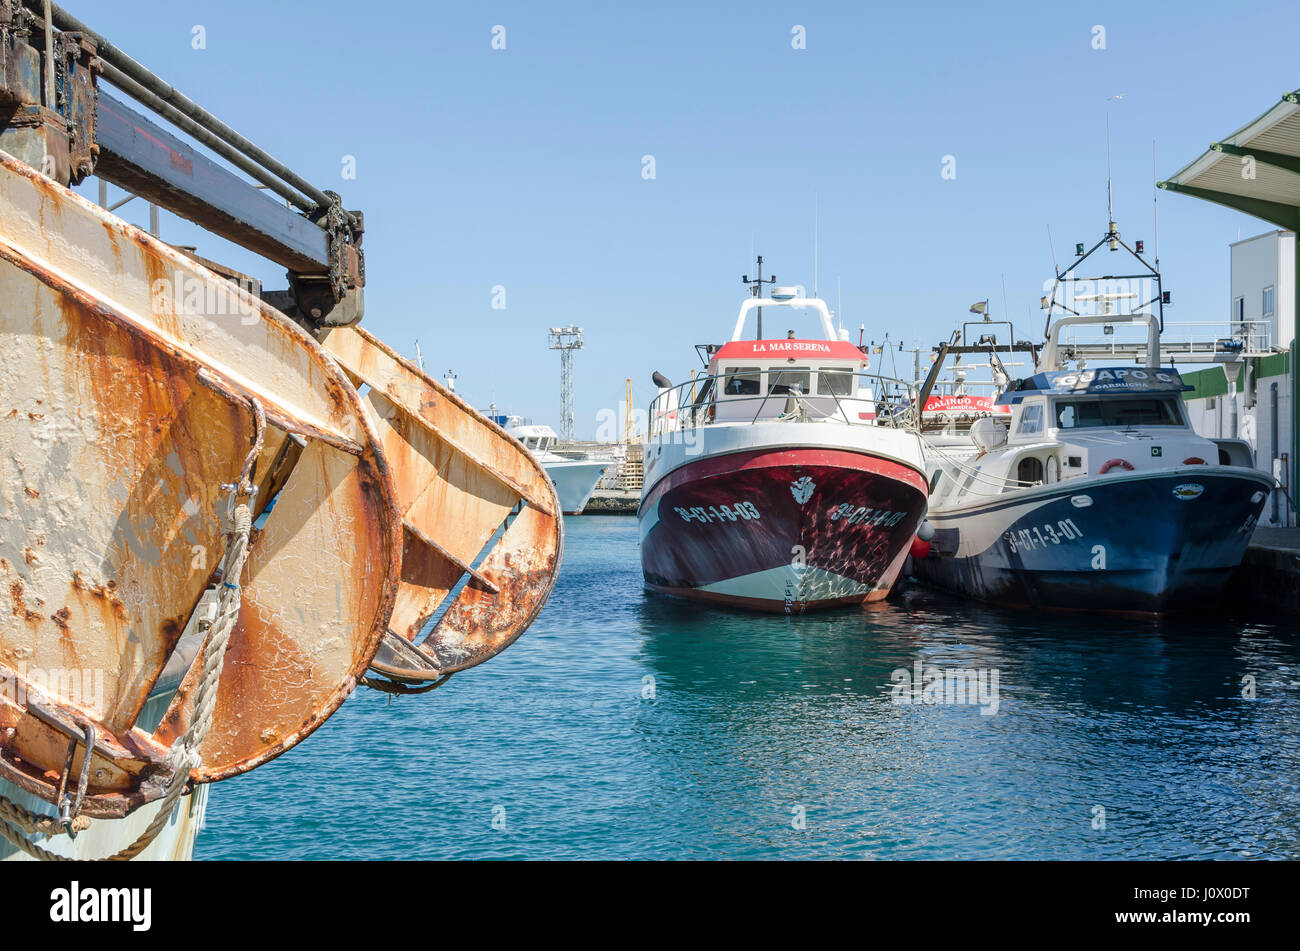 A view with perspective in Garrucha port, Almería province, Spain. Stock Photo